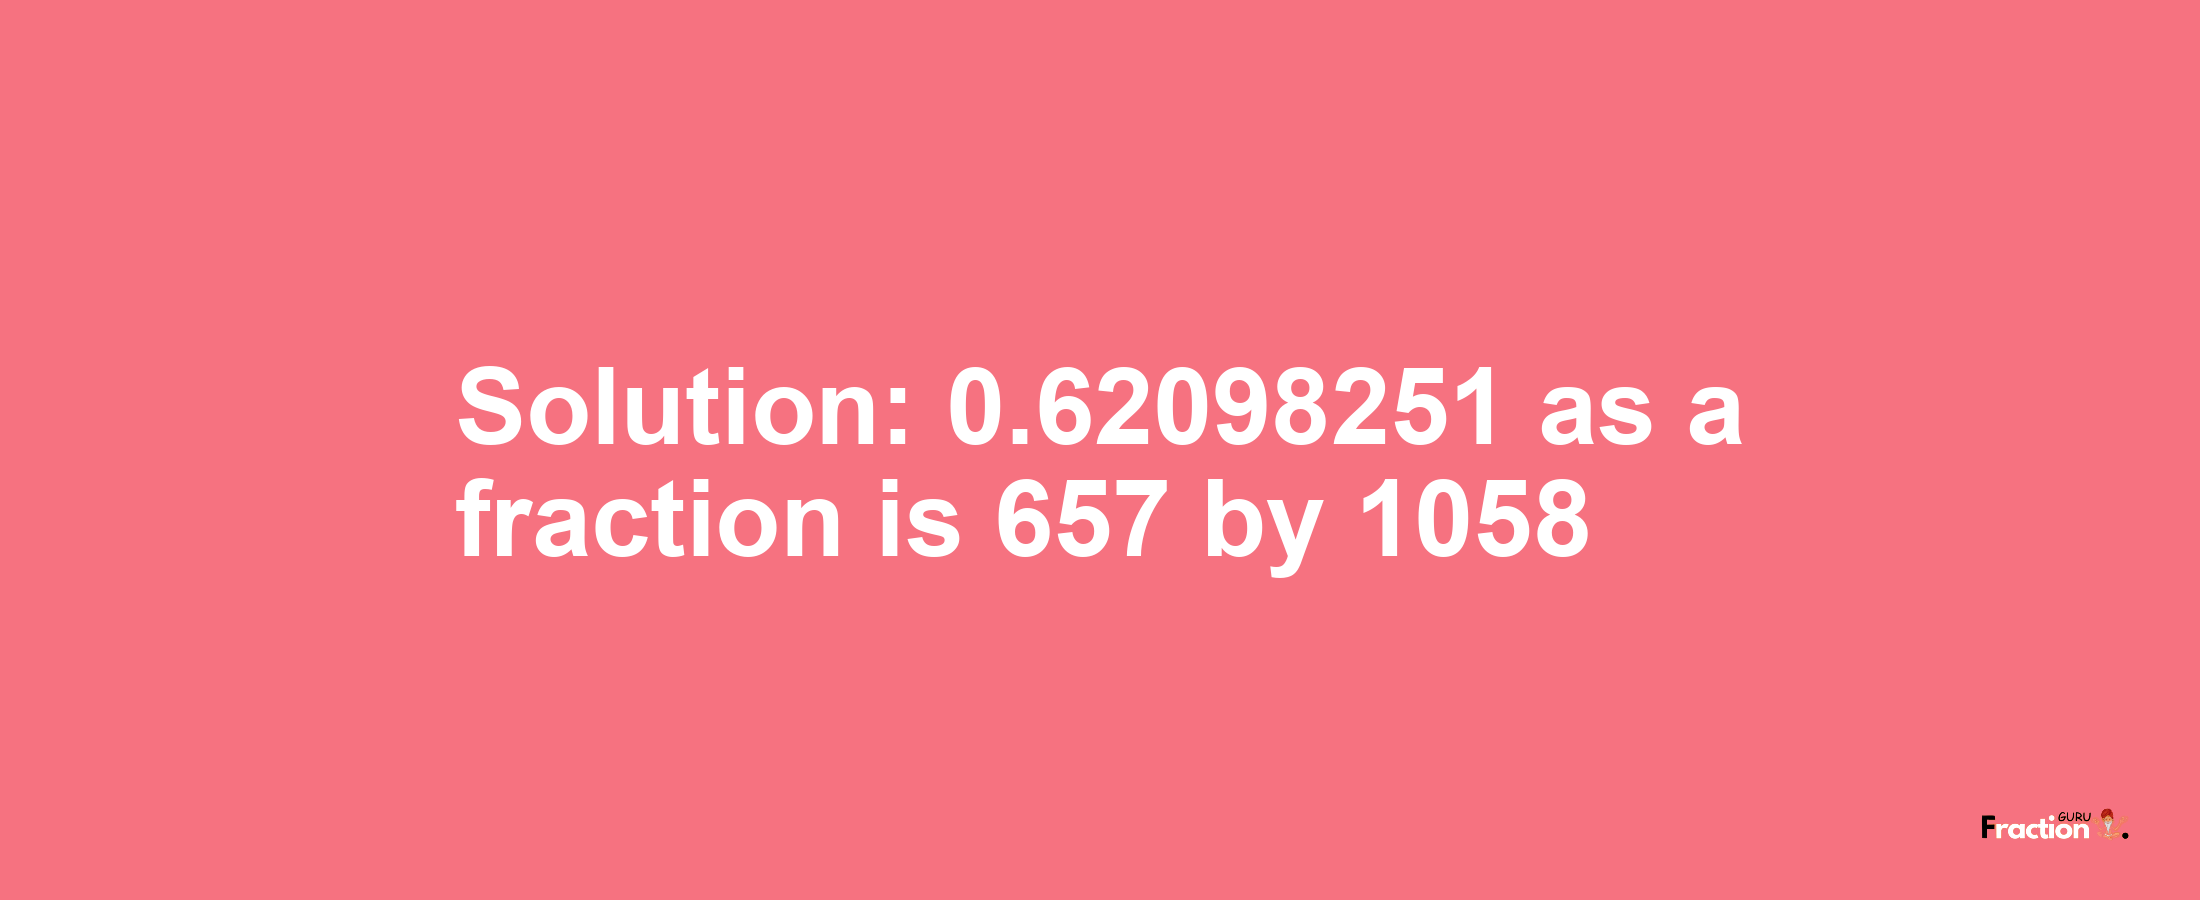 Solution:0.62098251 as a fraction is 657/1058